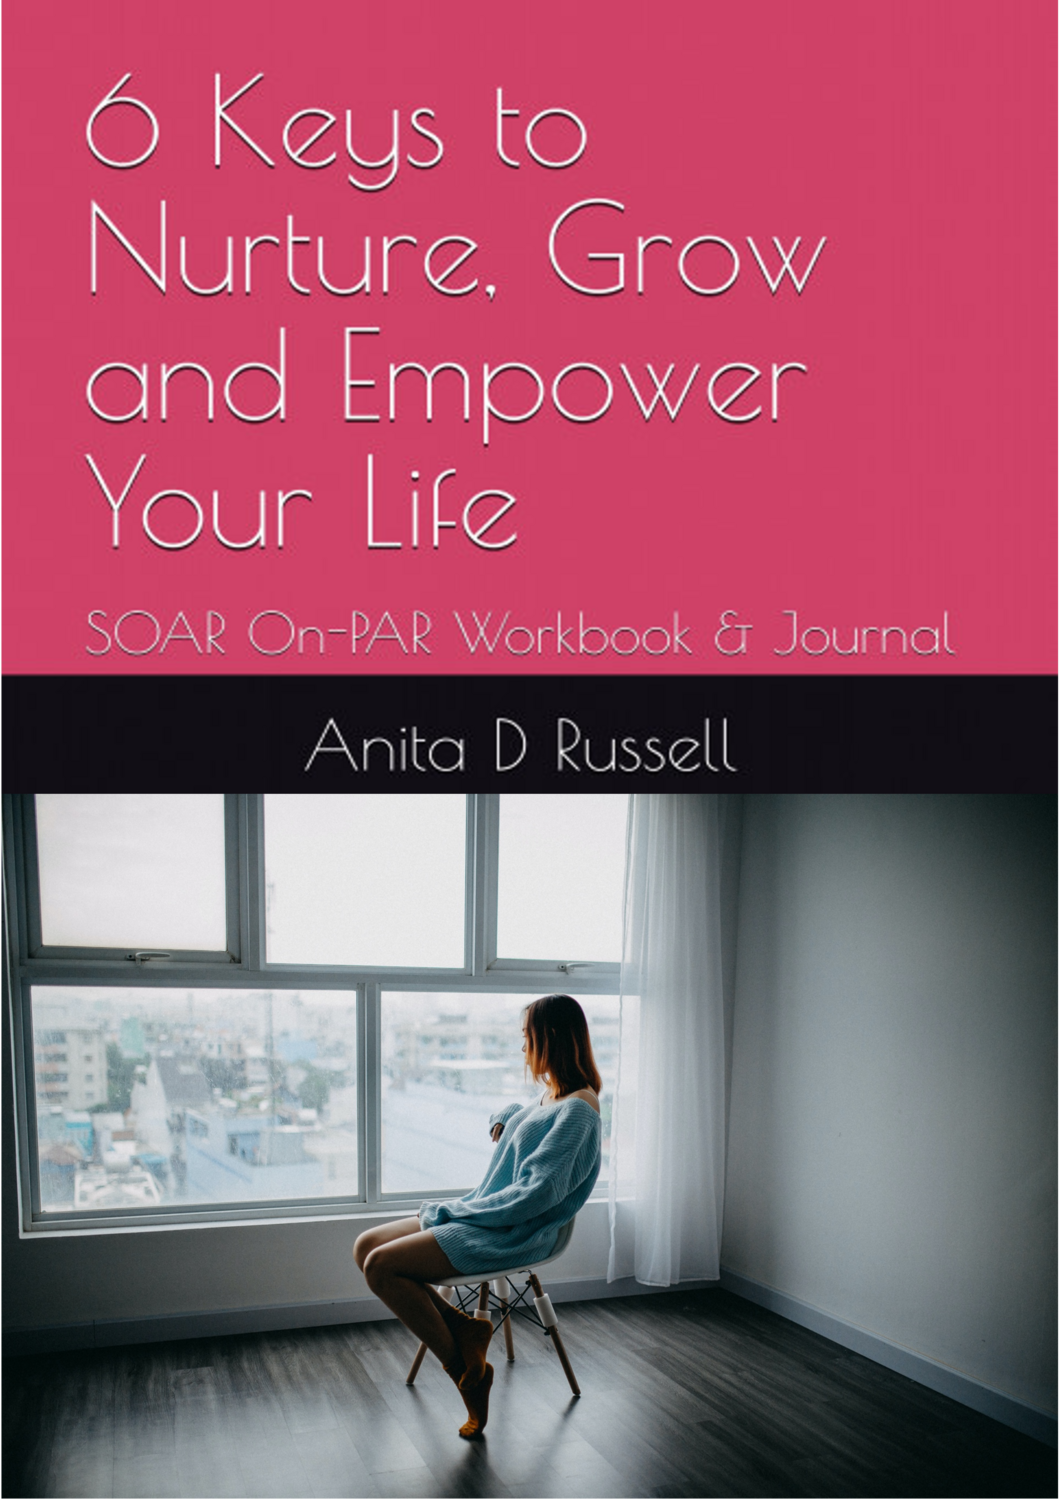 eWorkbook and Journal: 6 Keys to Nurture Grow and Empower Your Life